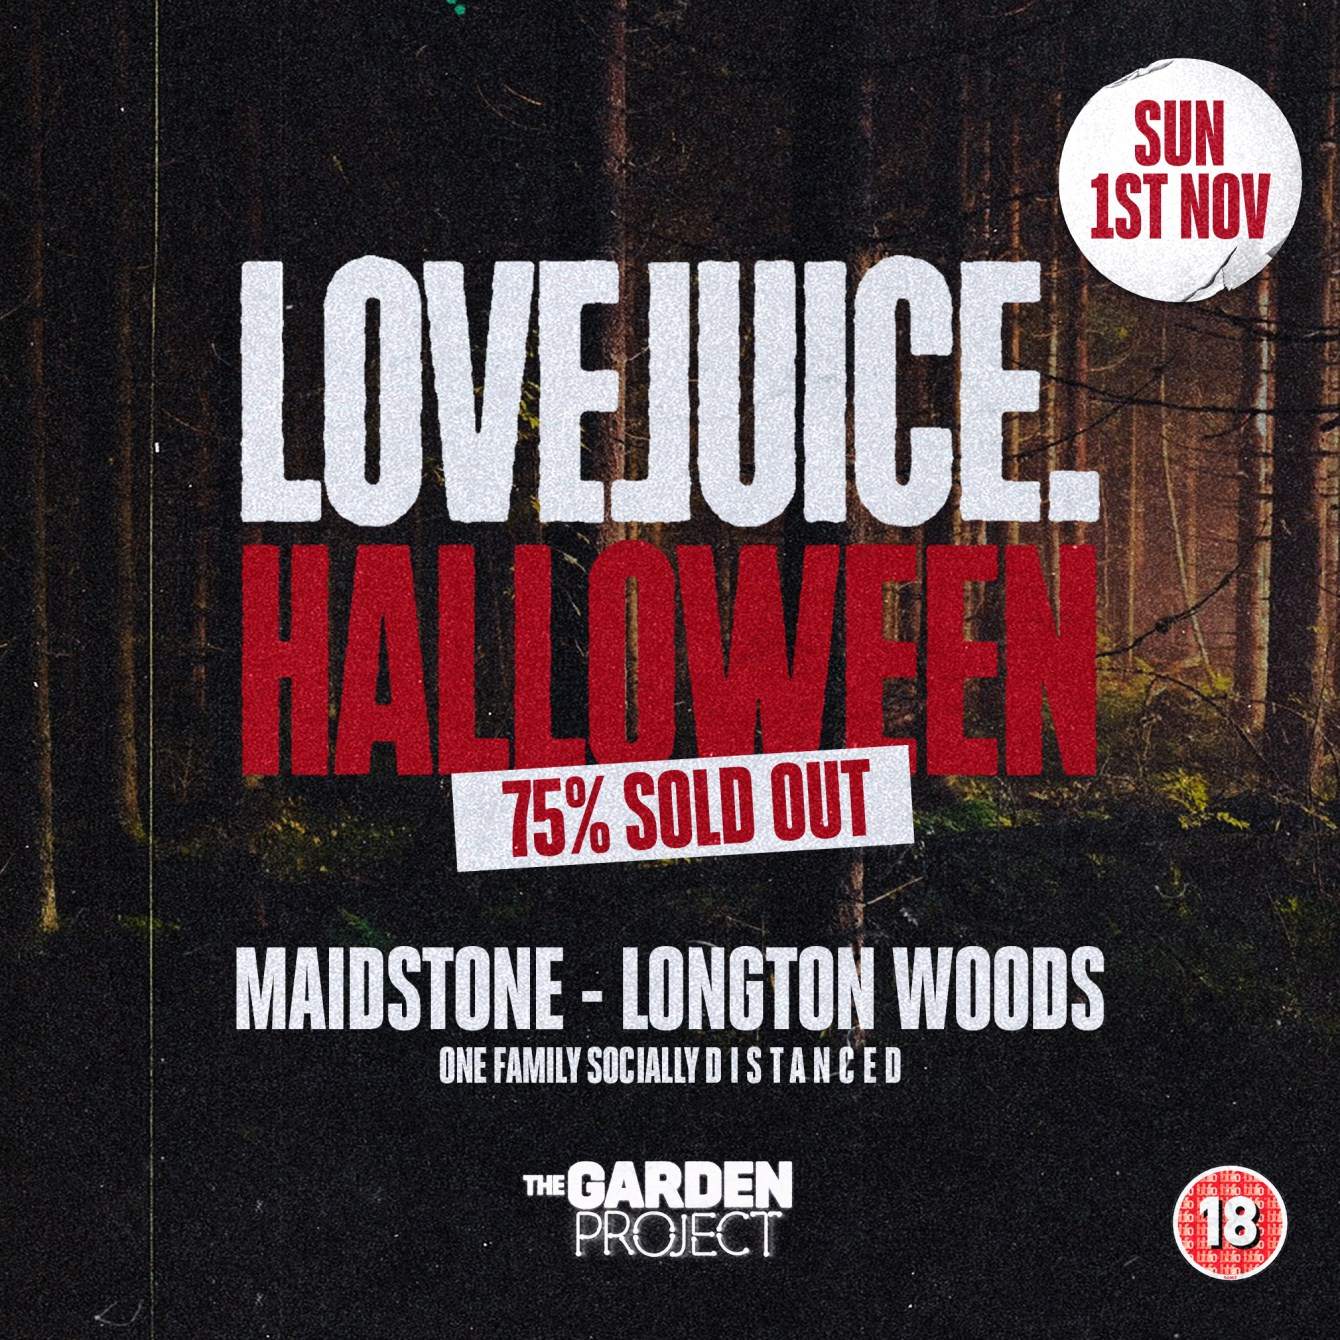 LoveJuice Halloween Kent - Lost In The Woods - Página frontal